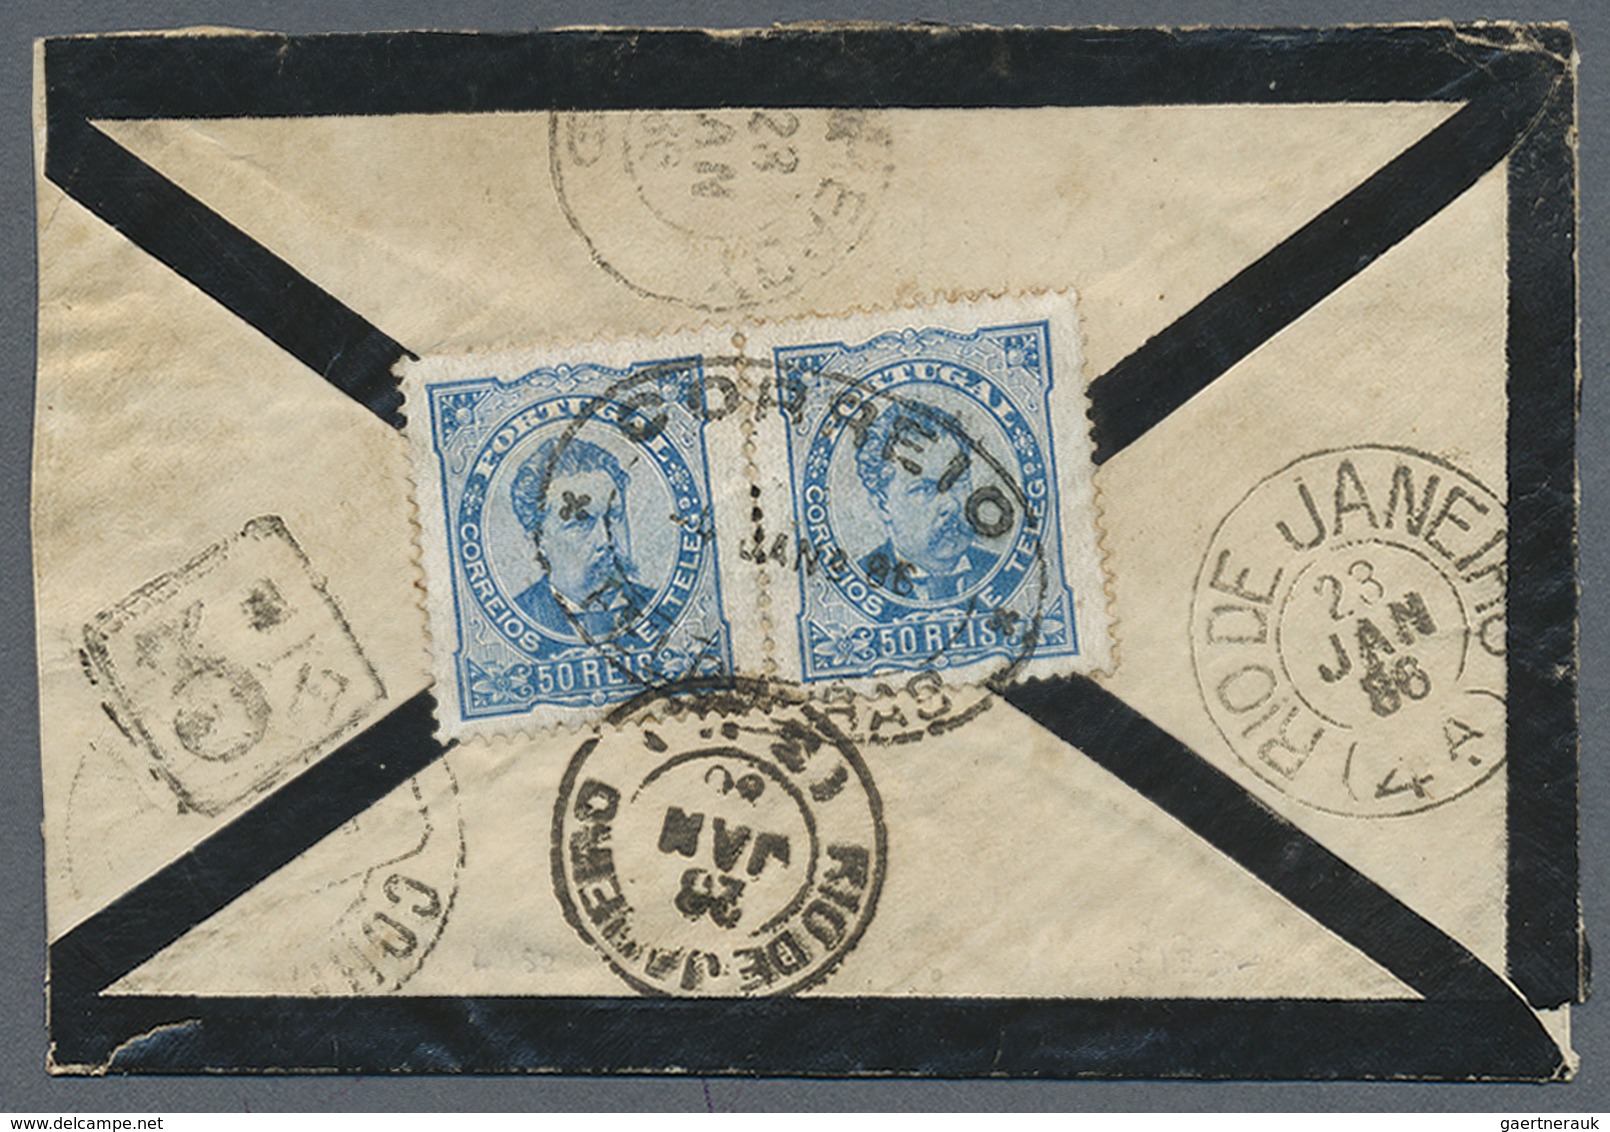 Br Portugal: 1855/1940, group of eleven better entires, mainly before 1900 showing attractive frankings